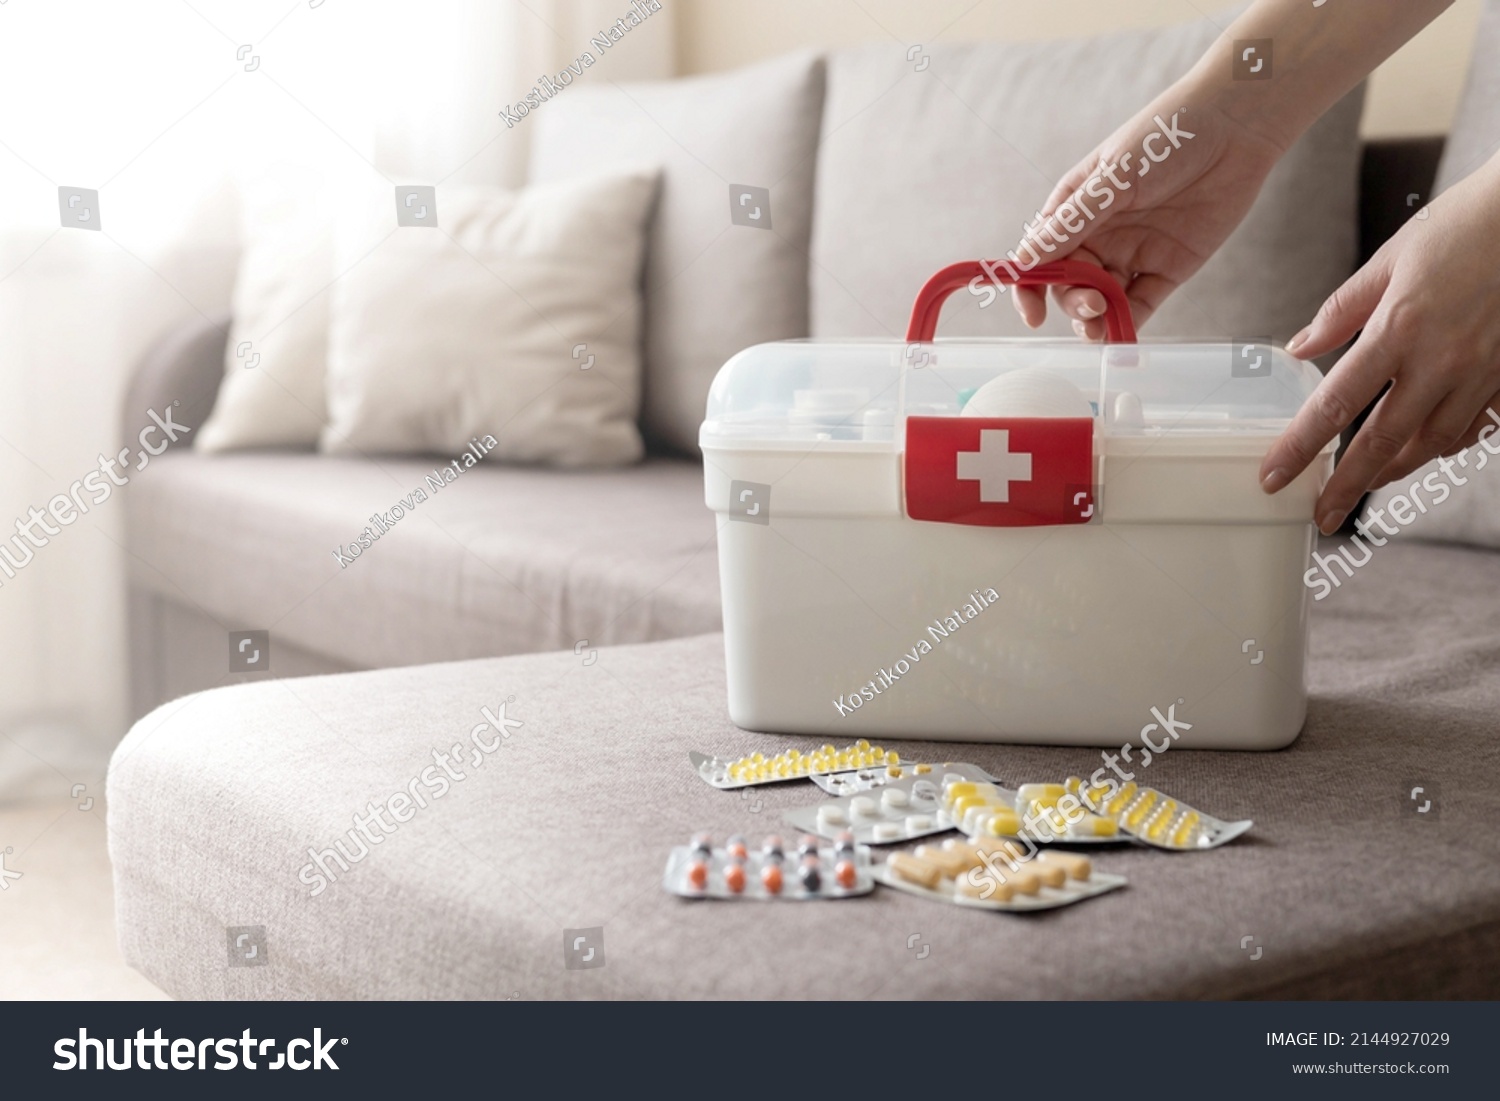 Closeup female hand neatly placing medicament at domestic first aid kit top view. Storage organization in transparent plastic box drug, pill, syringe, bandage. Fast health help safety emergency supply #2144927029